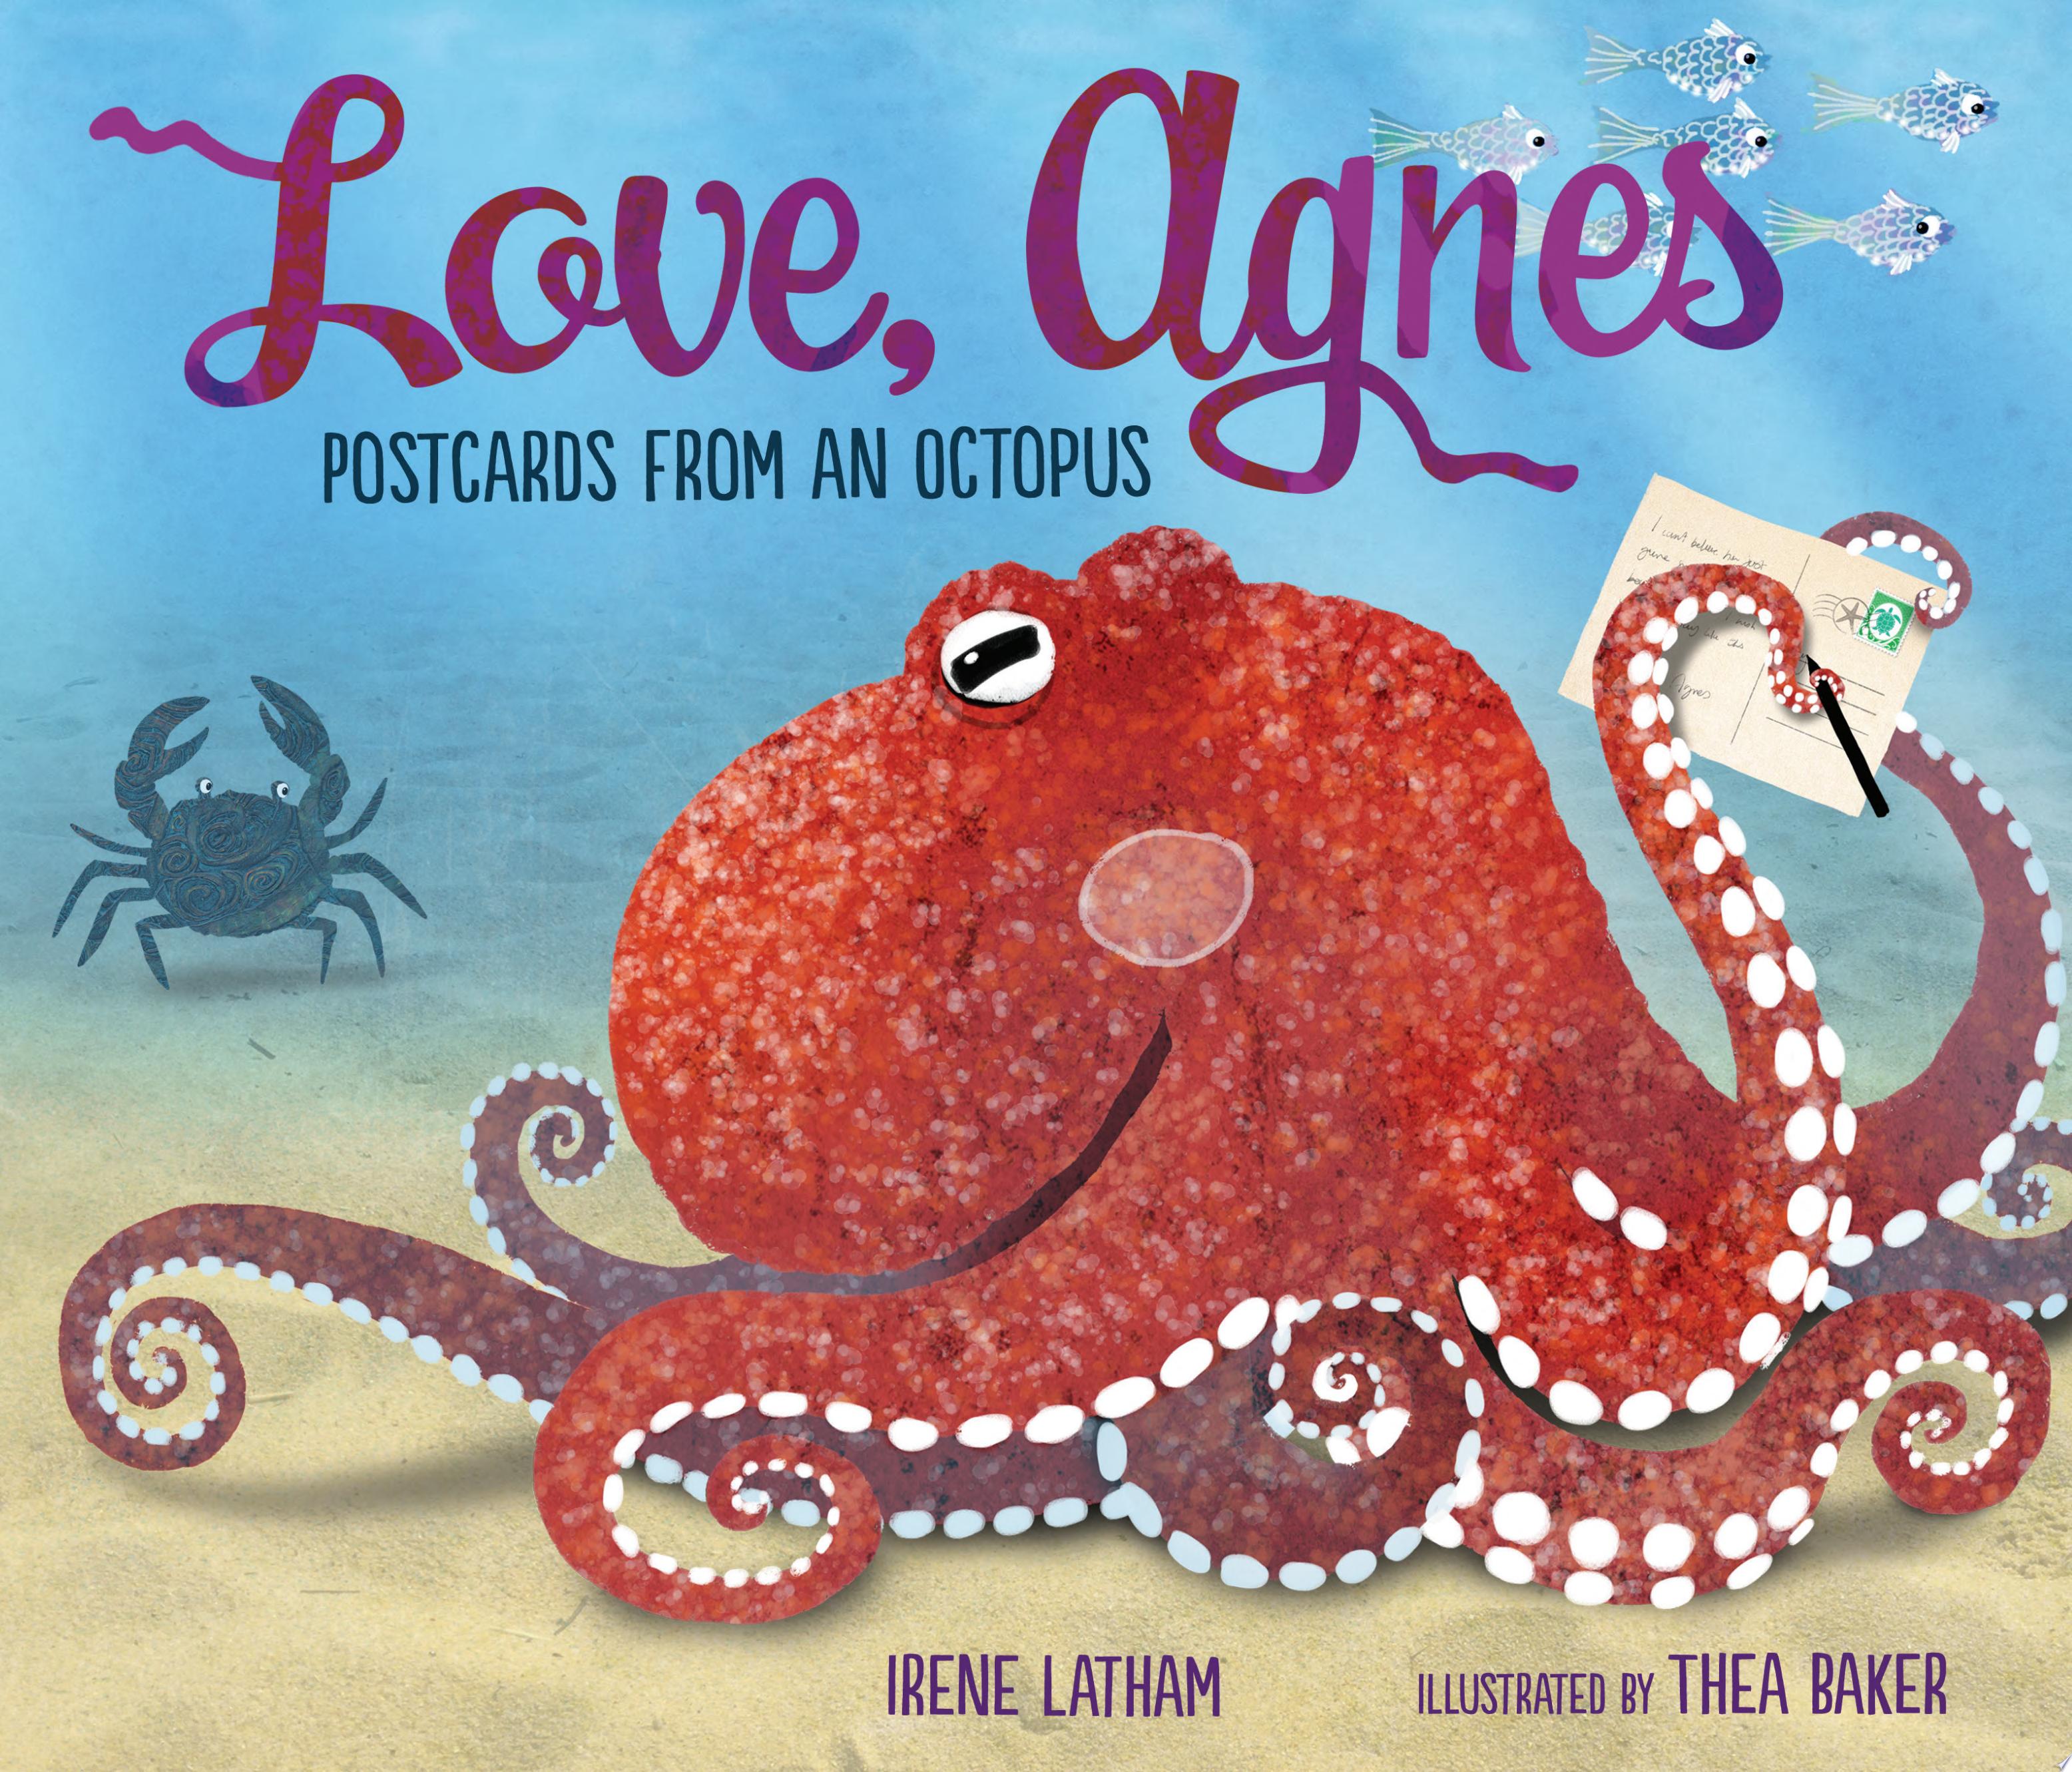 Image for "Love, Agnes"